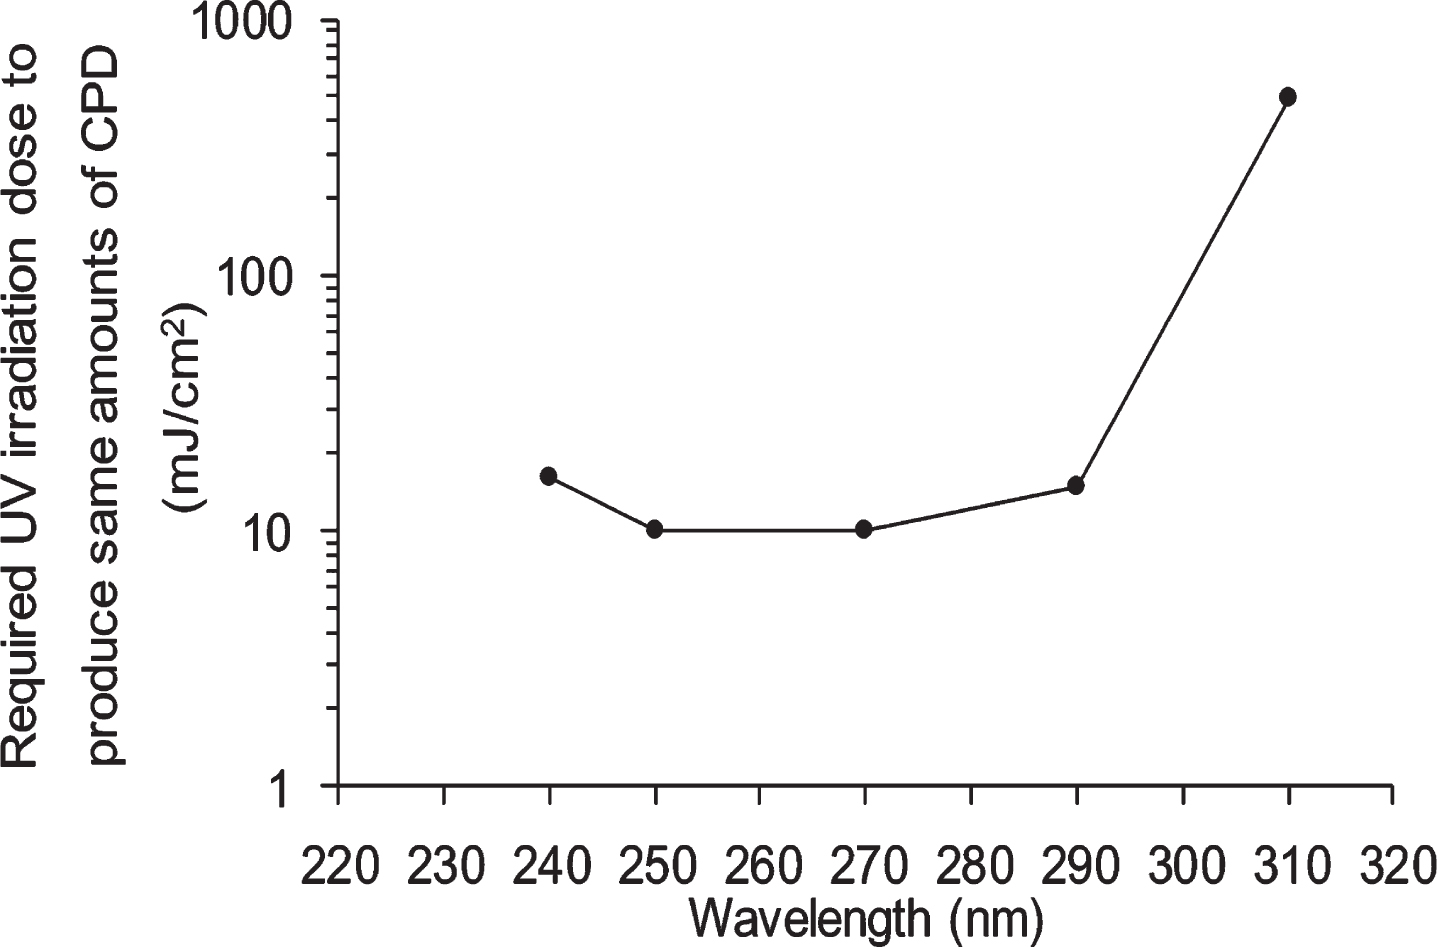 The vertical axis shows the required exposure dose at each wavelength to produce the same amount of CPD when UV irradiation of half-lethal dose at 250 nm produces CPD. The horizontal axis indicates the wavelength (nm). The reproducibility of this experiment has been confirmed in several experiments.